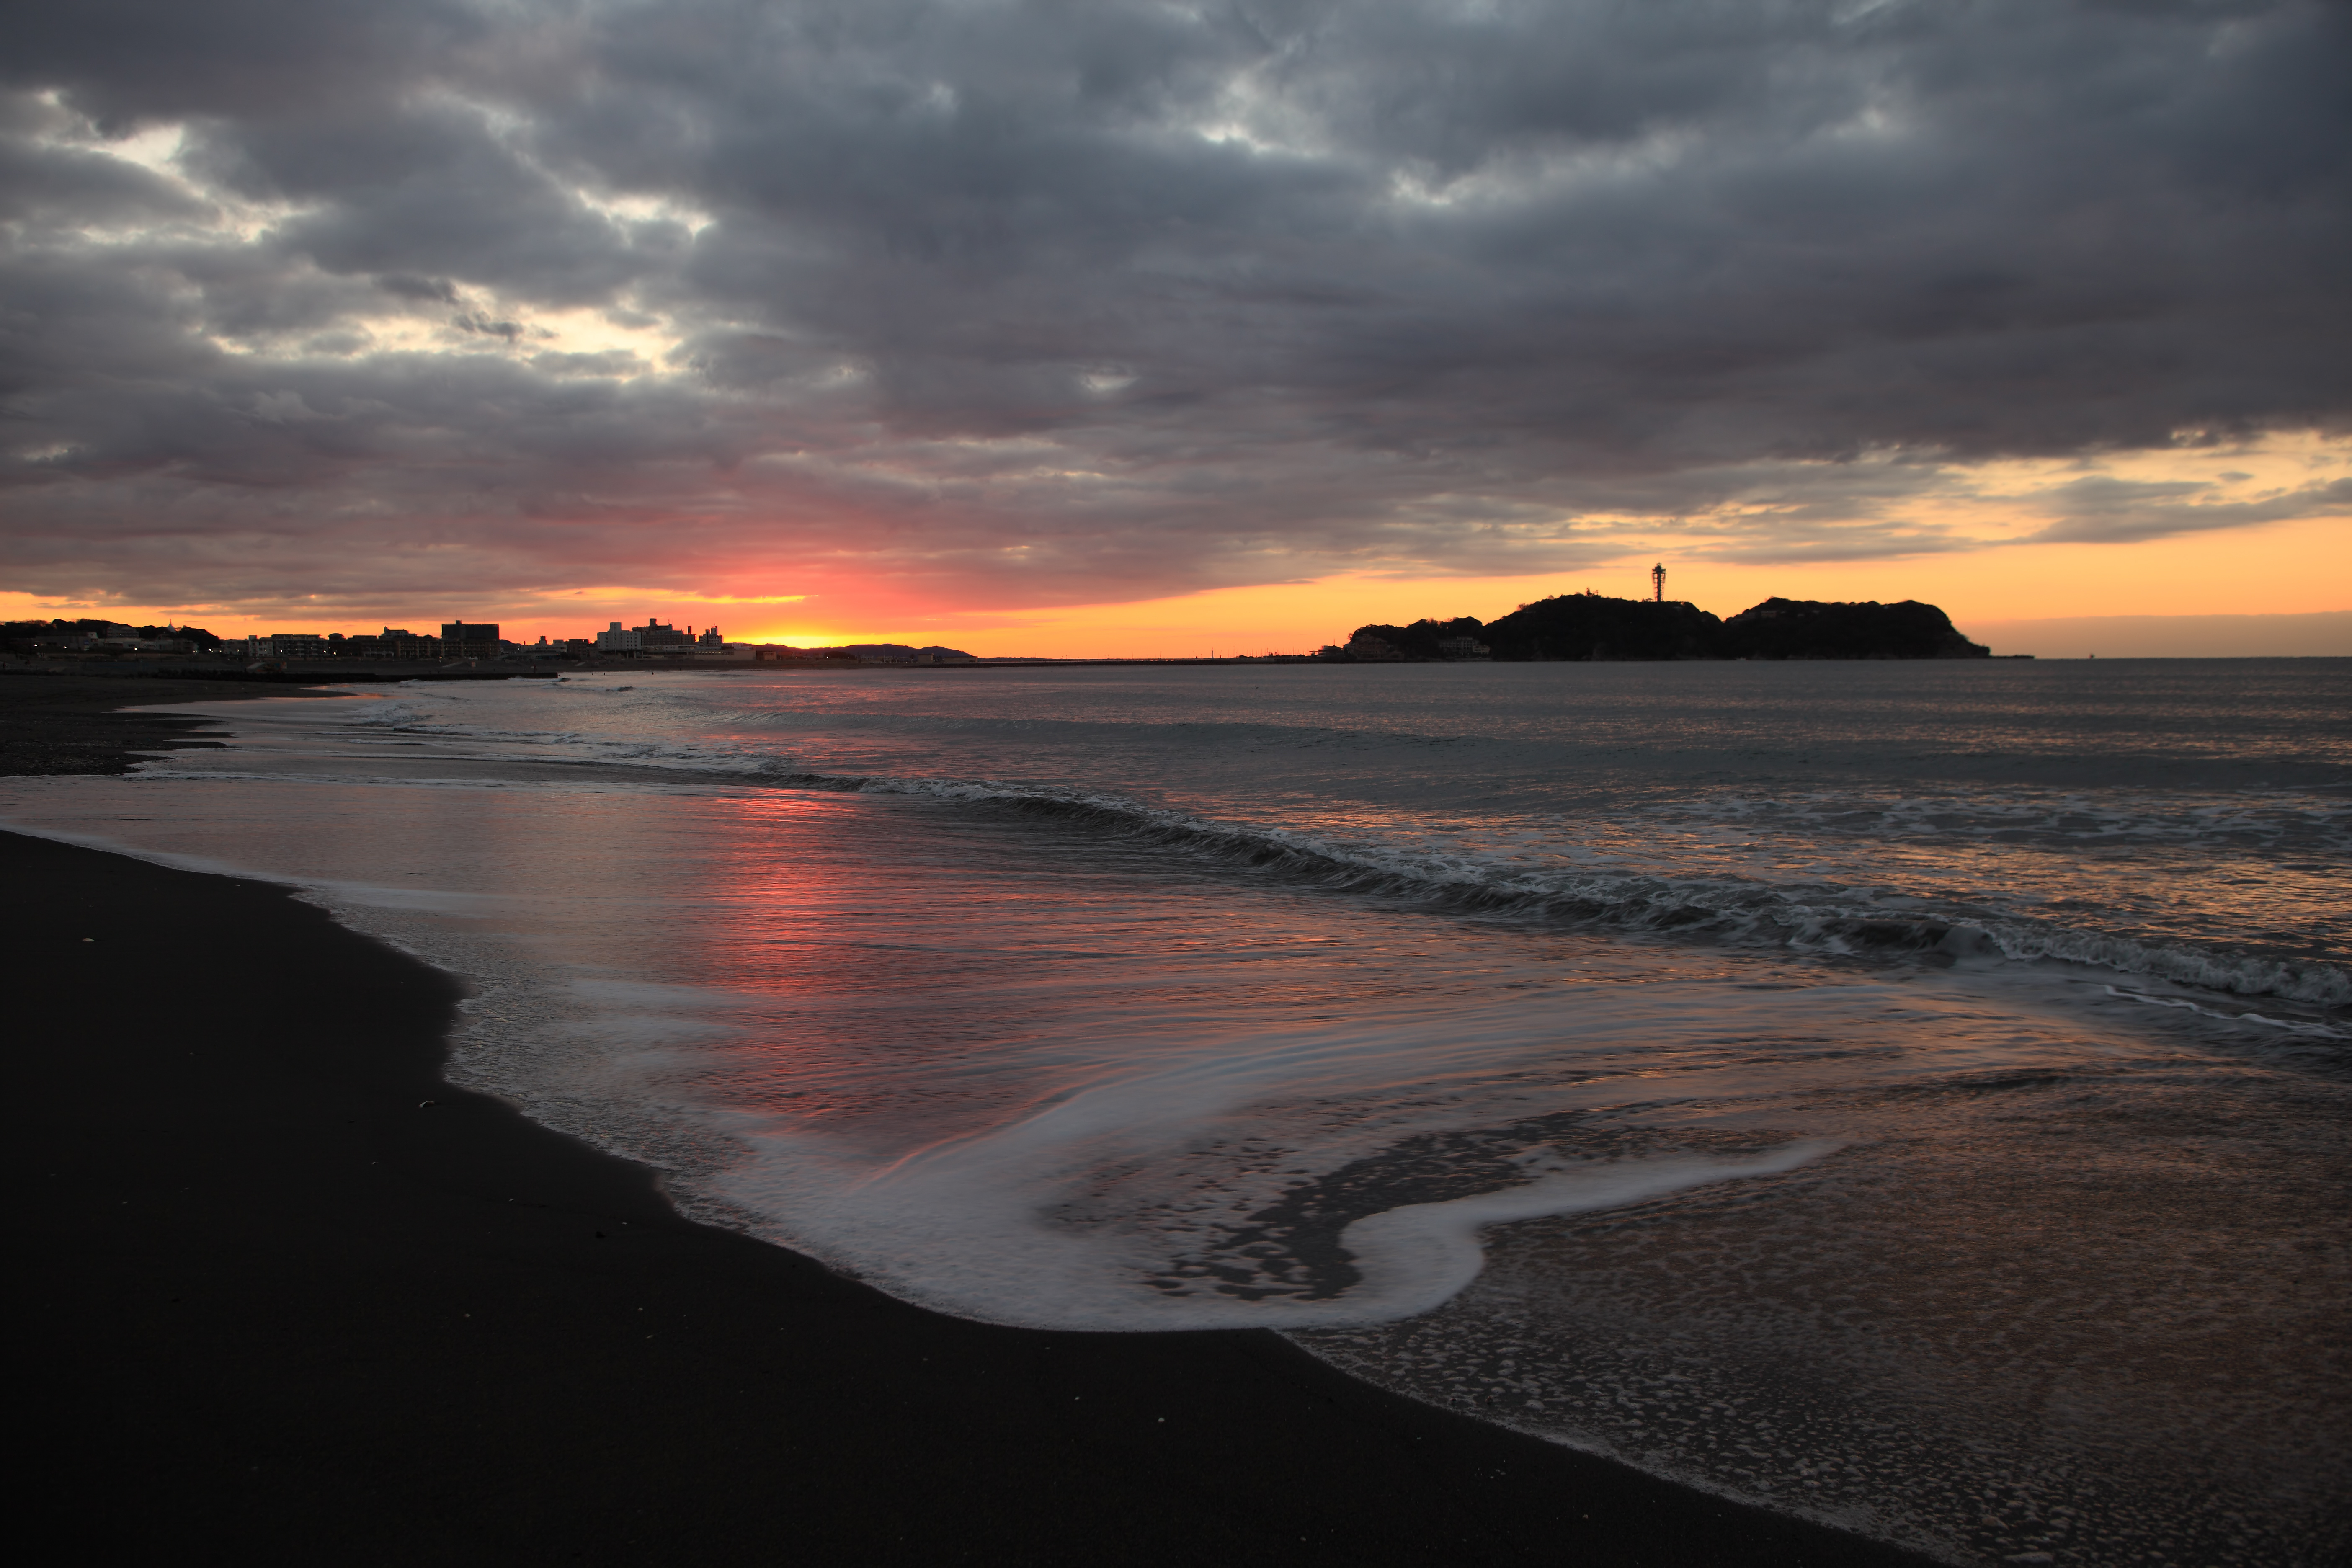 Cloud and shore and Enoshima of the morning glow